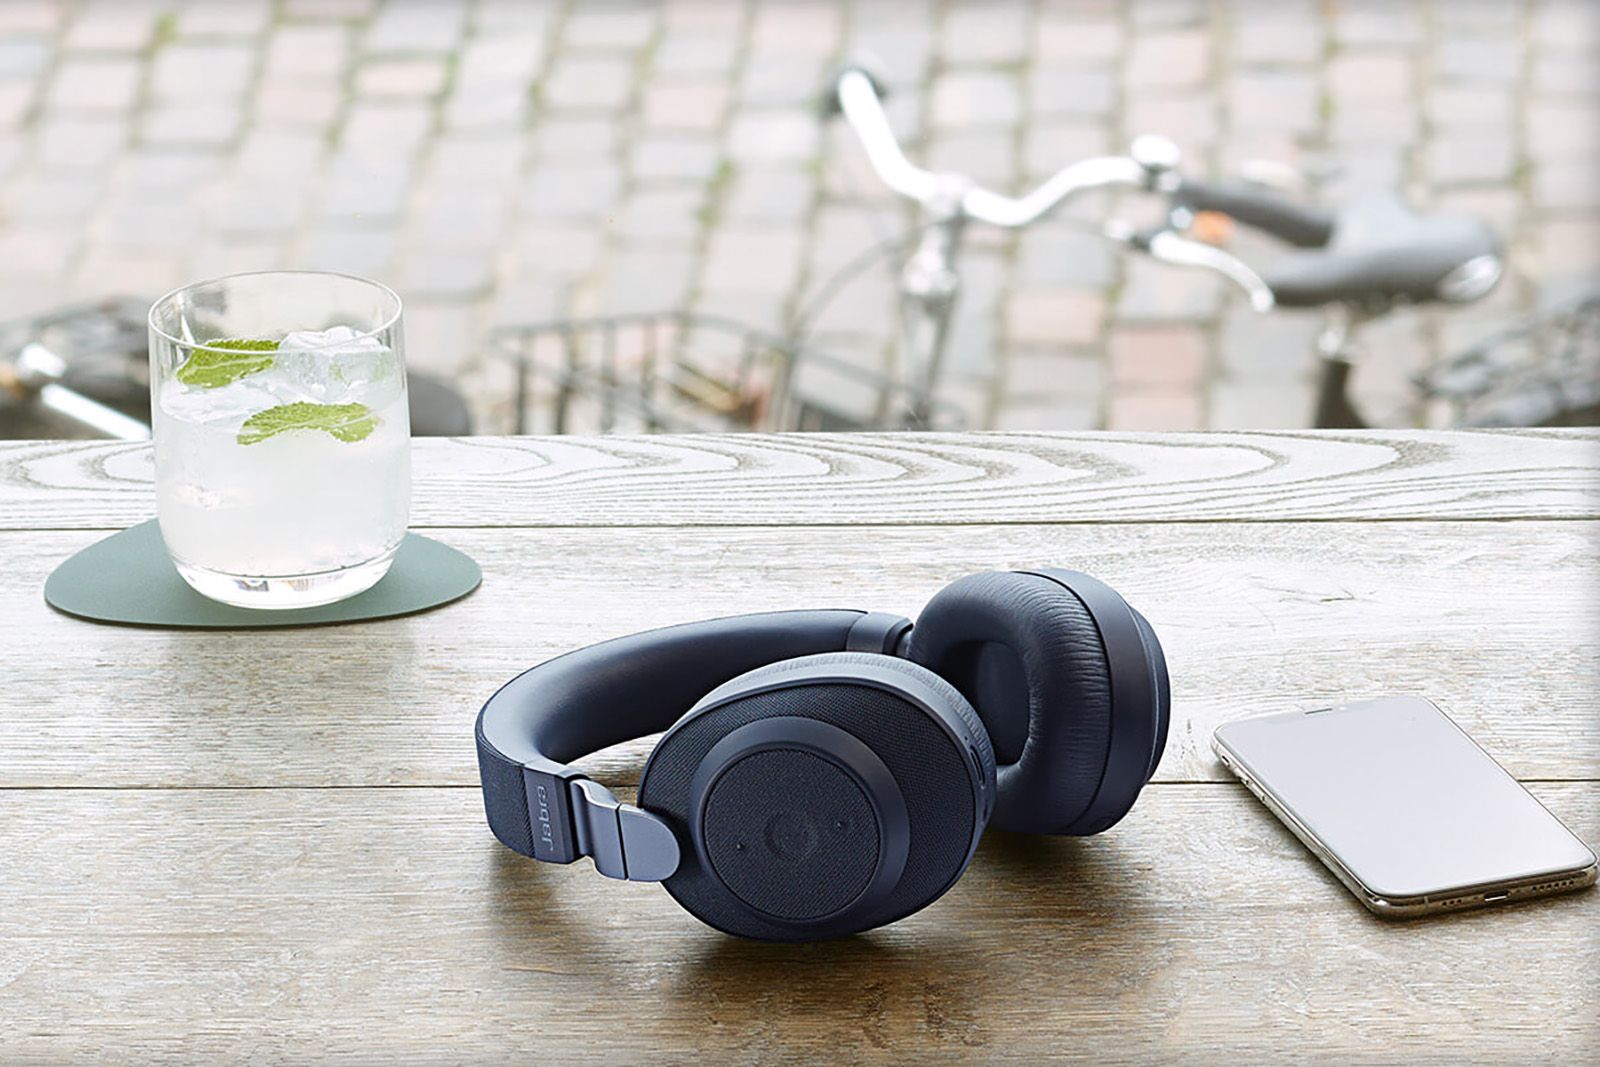 Jabra Elite 85H headphones coming with ANC and mighty 32 hours battery life image 1